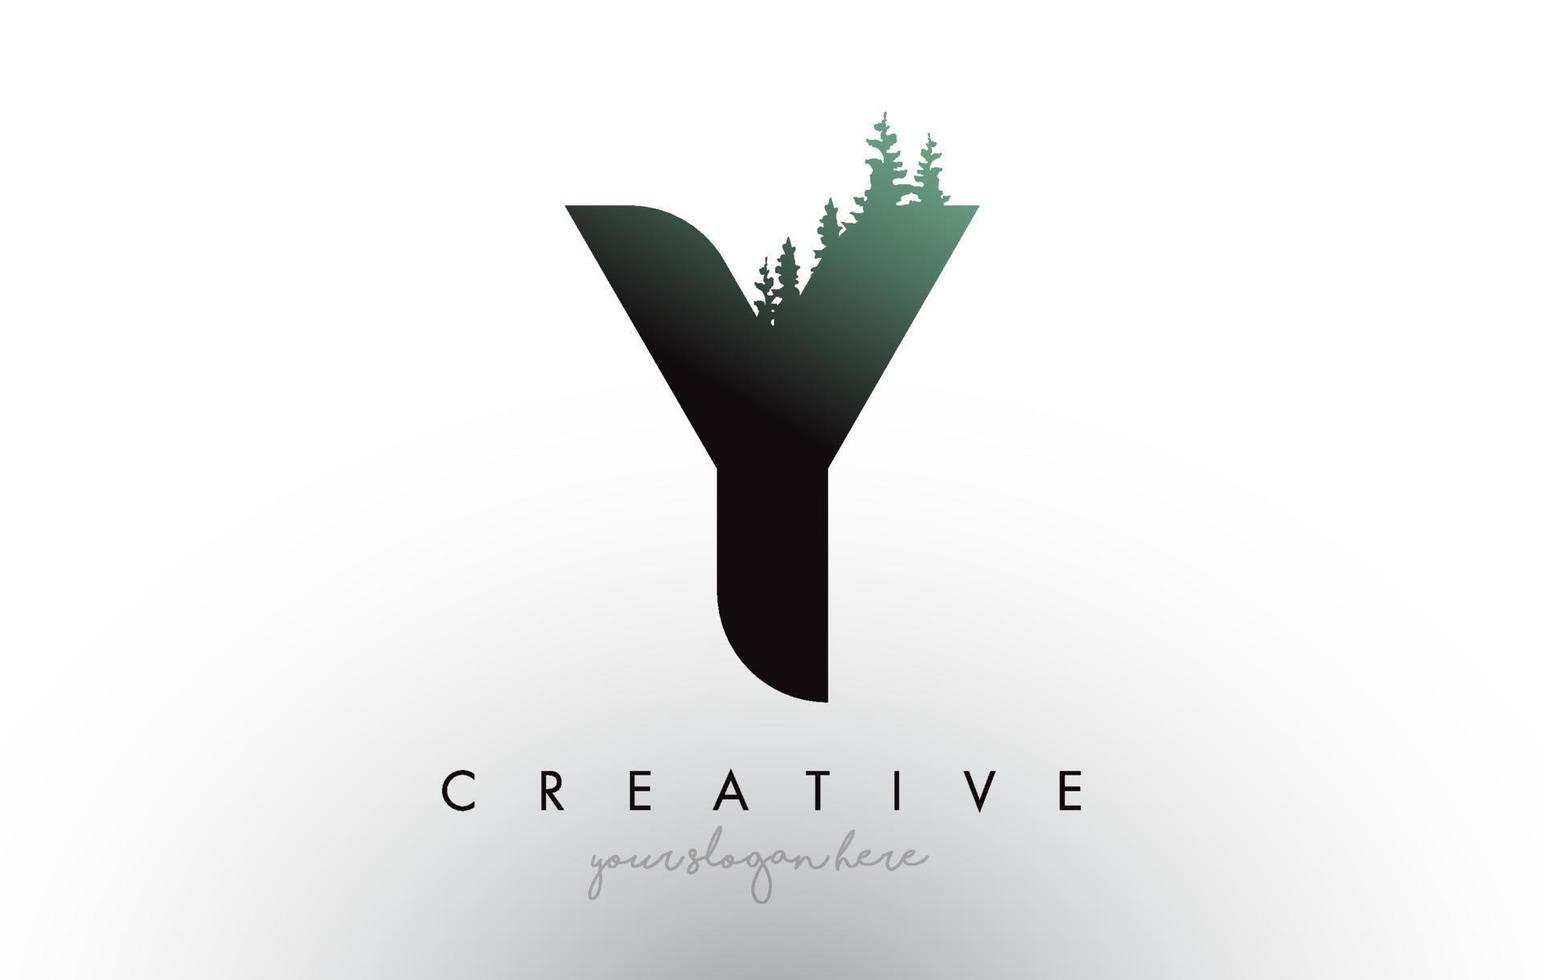 Creative Y Letter Logo Idea With Pine Forest Trees. Letter Y Design With Pine Tree on Top vector